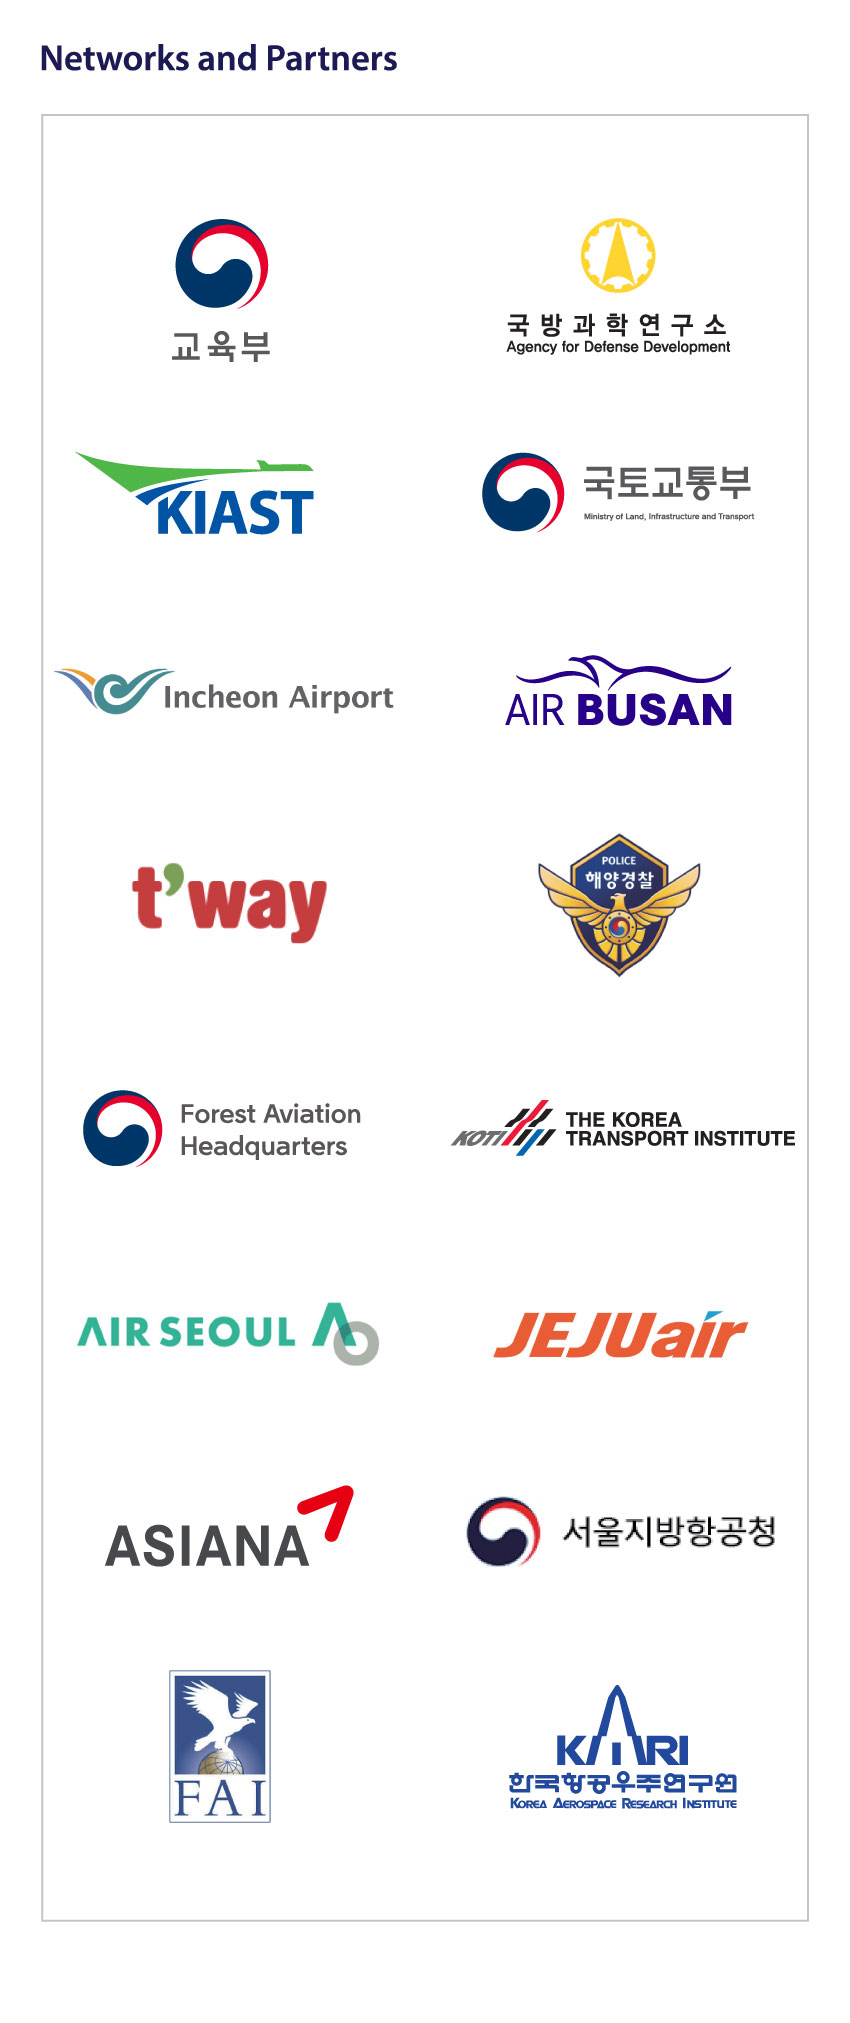 Networks and Partners
												교육부
												국 방 과 학 연구 소 Agency for Defense Development
												Ministry of Education
												국토교통부
												KIAST
												Ministry of Land, Infrastructure and Transport
												Korea Institute Of Aviation Safety Technology
												Incheon Airport
												Incheon Airport
												AIR BUSAN
												POLICE 해양경찰
												No
												tway
												tway
												Korea Coast Guard
												Forest Aviation Headquarters
												THE KOREA TRANSPORT INSTITUTE
												AIR SEOUL
												JEJUair
												ASIANA
												서울지방항공청
												Seoul Regional Office of Aviation
												KITRI 한국항공우주연구의
												FAI
												KOREA AEROSPACE RESEARCH INSTITUTE